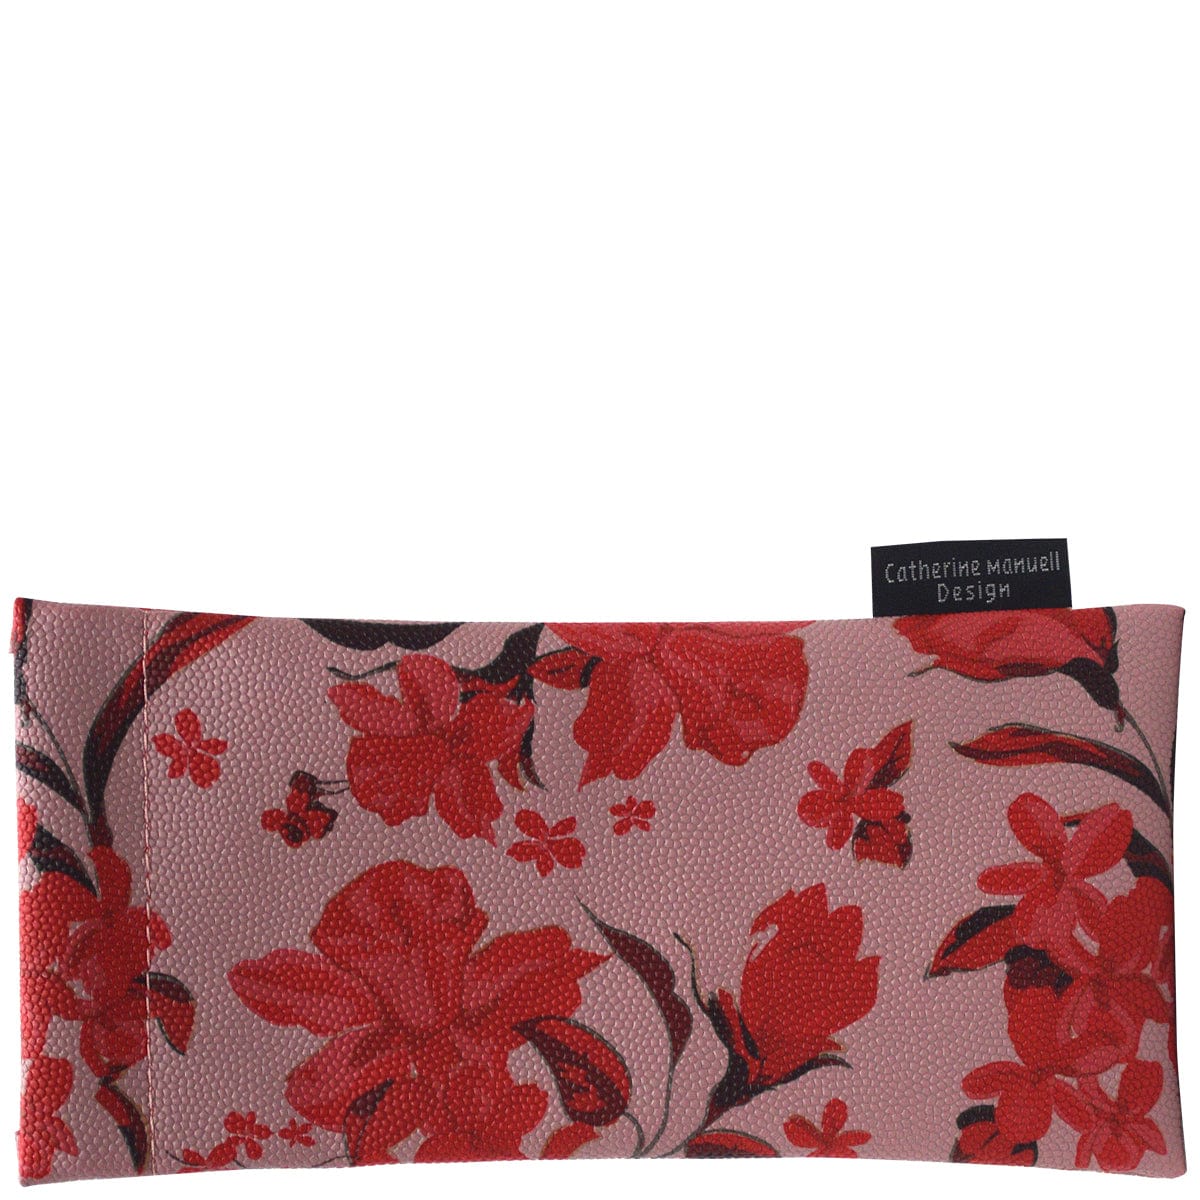 Spec Case - Iced Coffee Red Flower - 20% off